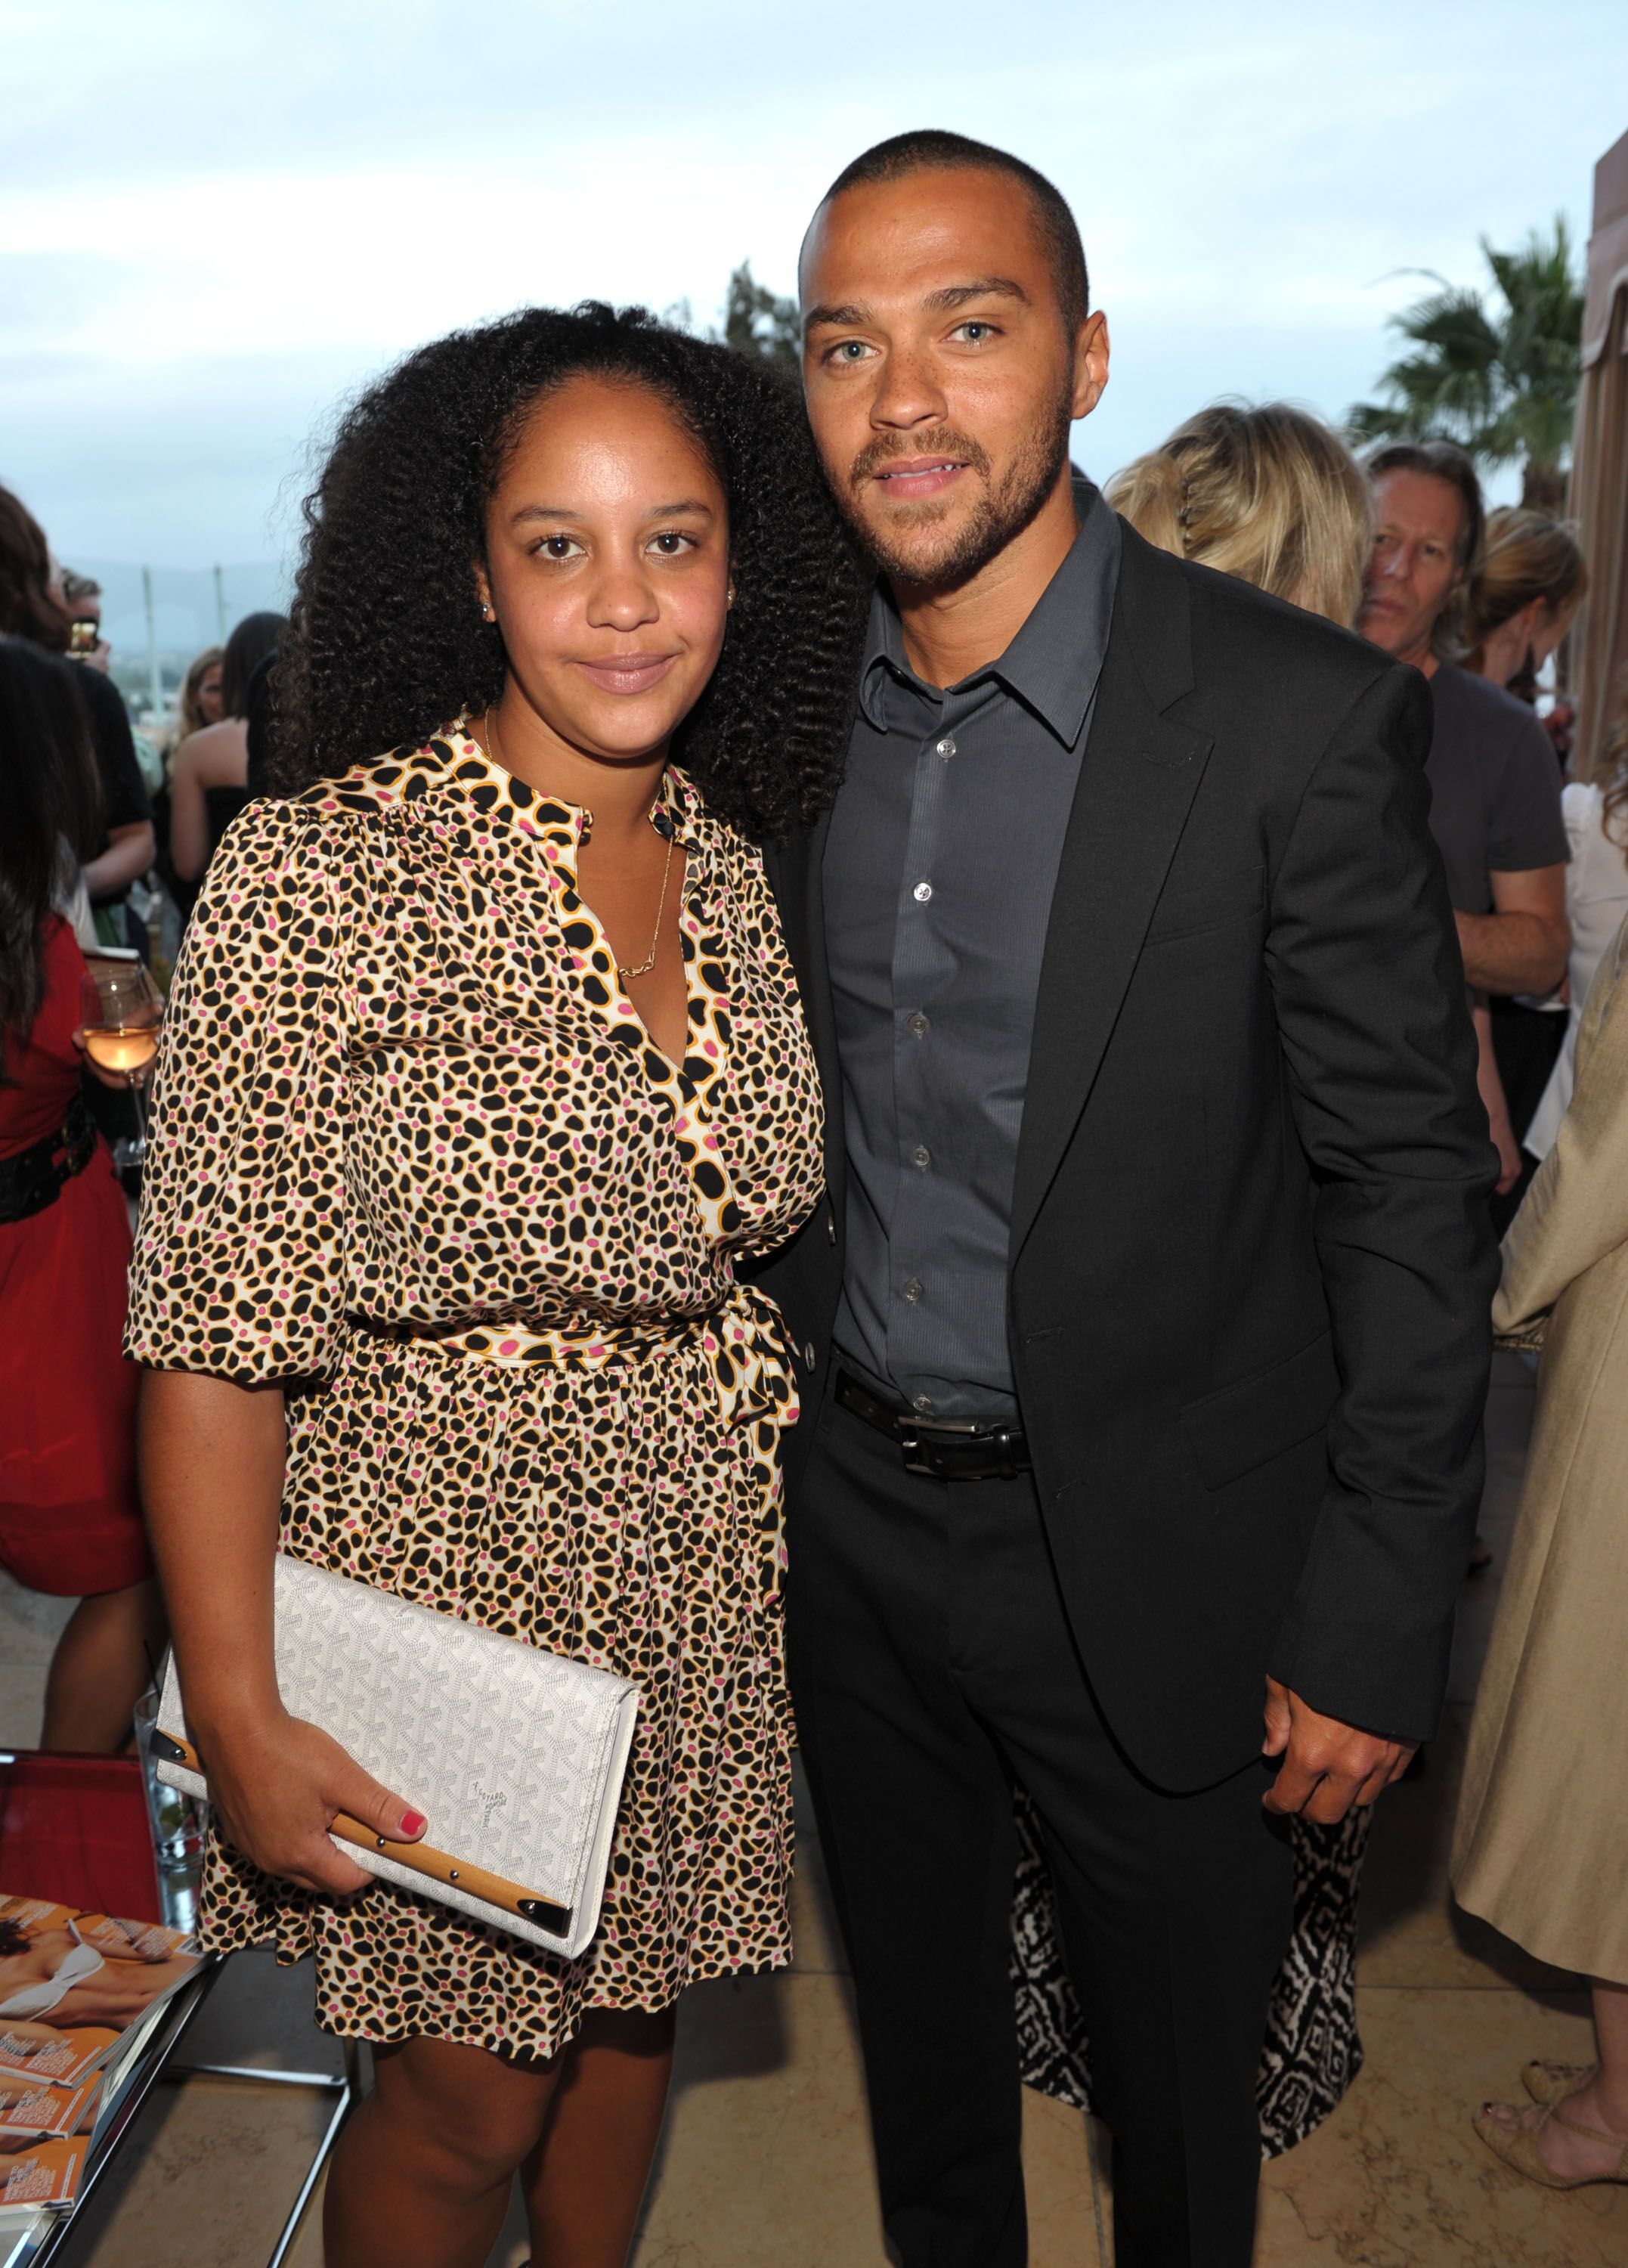 "Gey's Anatomy" star Jesse WIlliams with ex wife Aryn Drake-Lee at the "GQ, Nautica, and Oceana World Oceans Day Party" in 2010 | Source: Getty Images